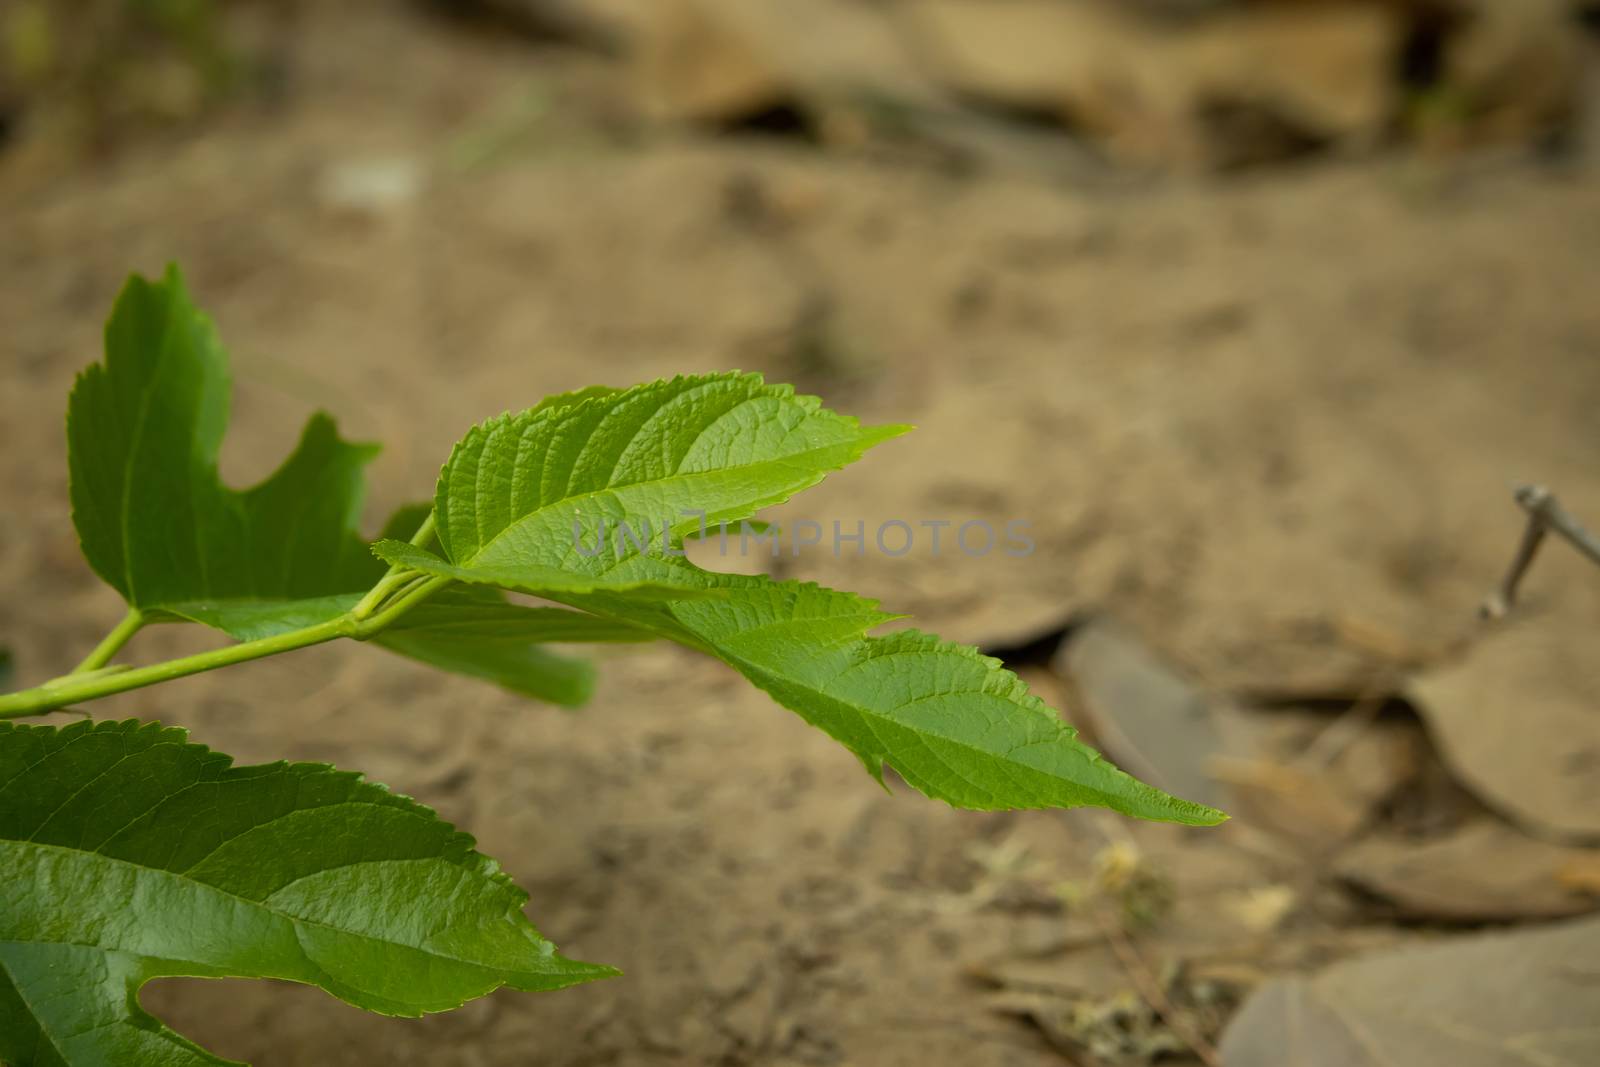 Beautiful mulberry leaf view from one side by 9500102400